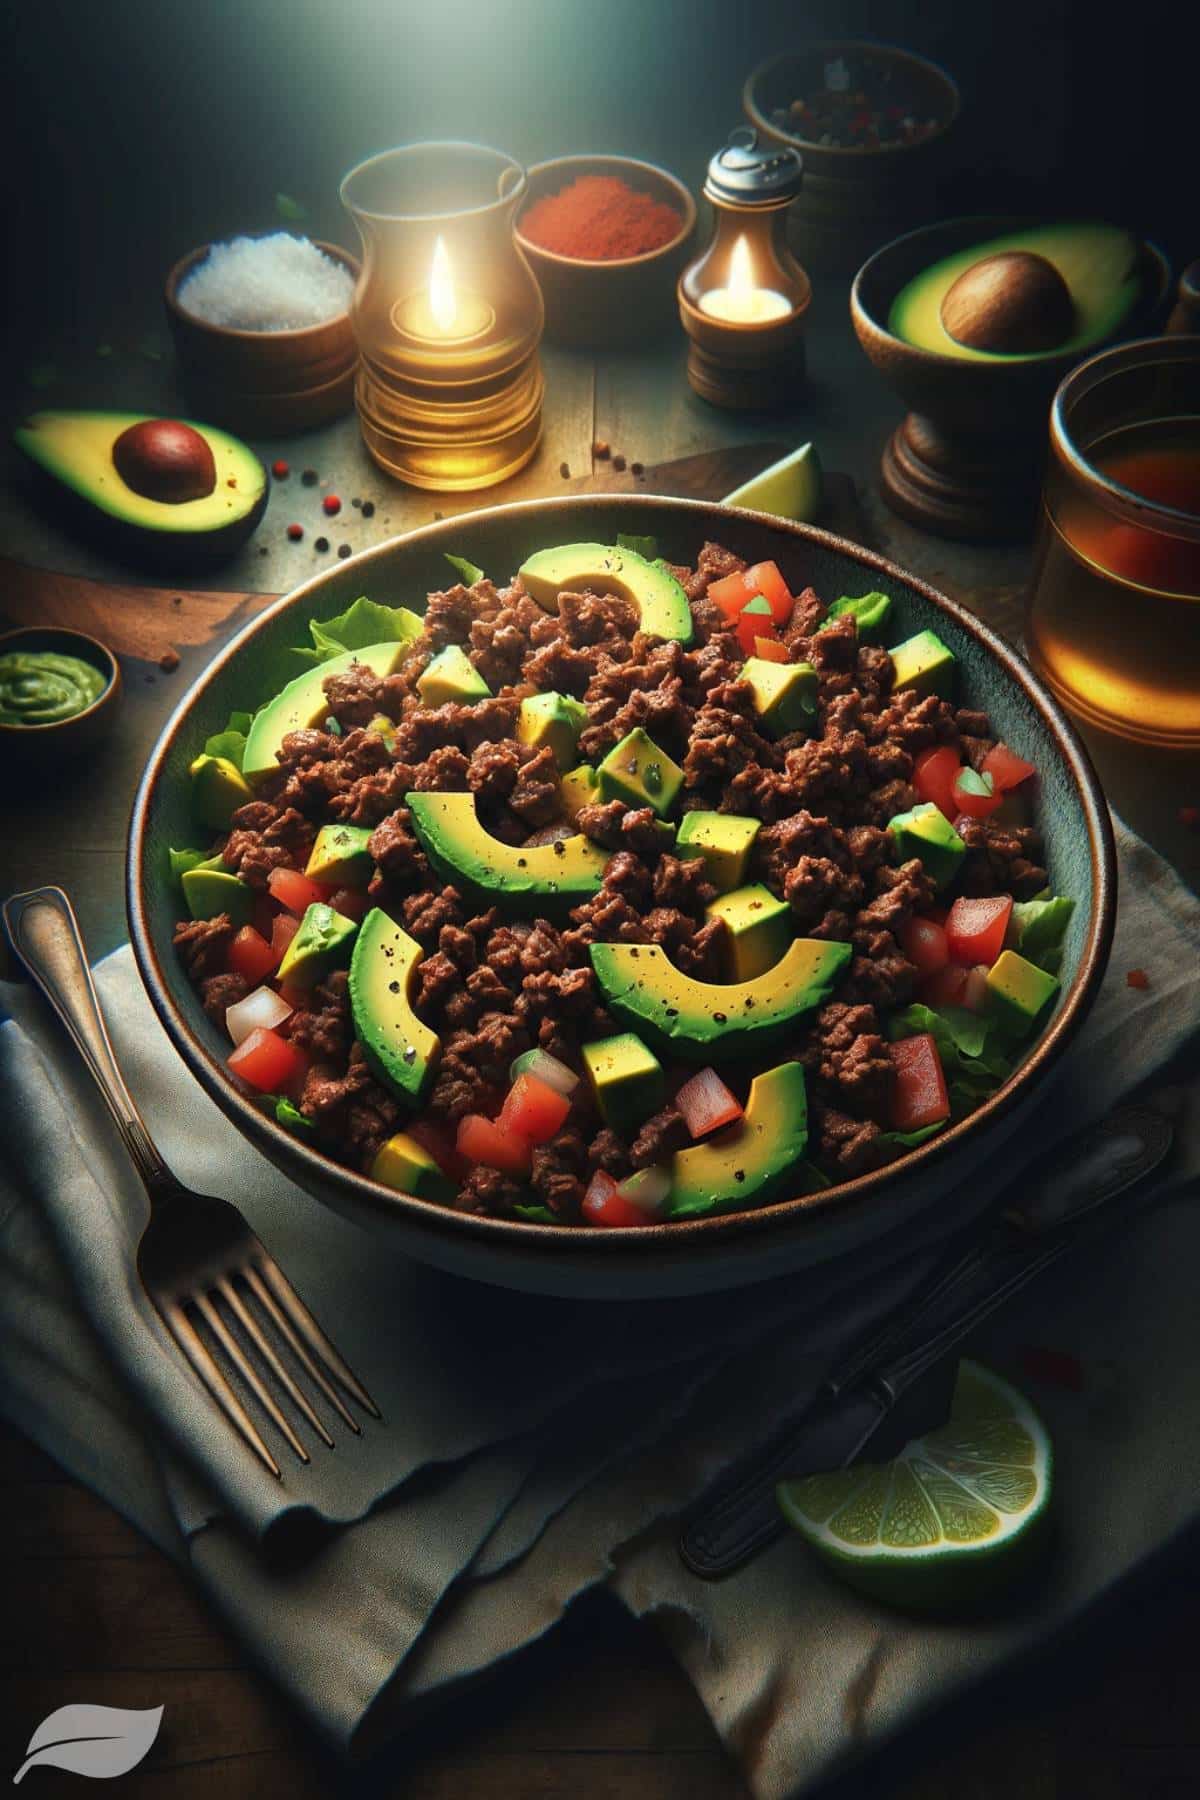 Classic Beef Keto Salad, focusing on the rich texture of the cooked ground beef and the vibrant colors of the diced avocado and tomato (1)